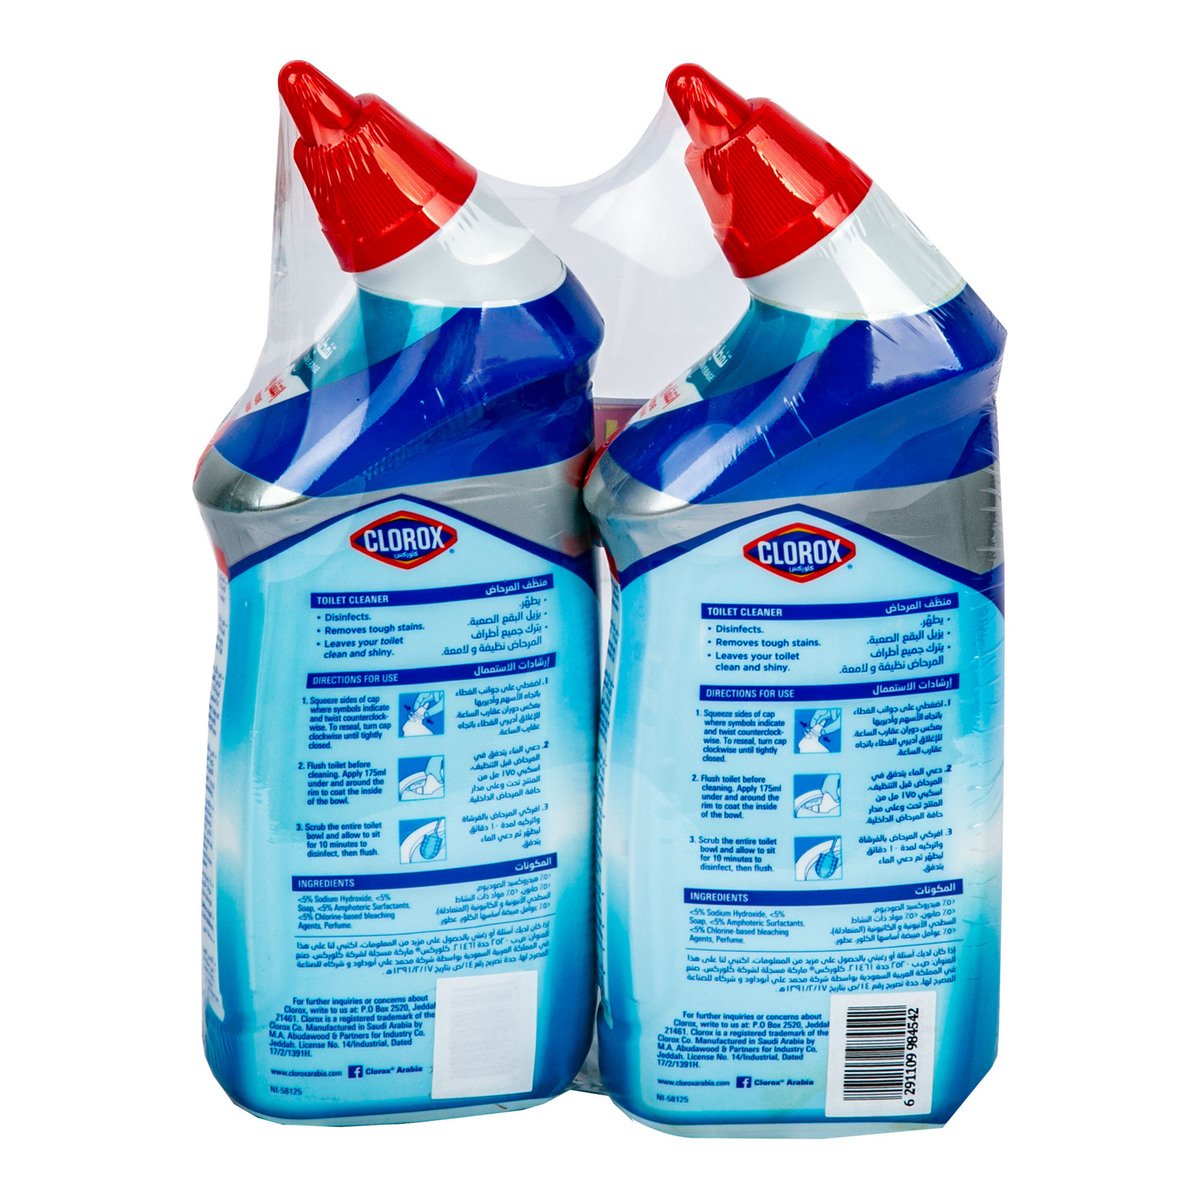 Clorox Toilet Bowl Cleaner Original With Bleach Value Pack 2 x 709 ml